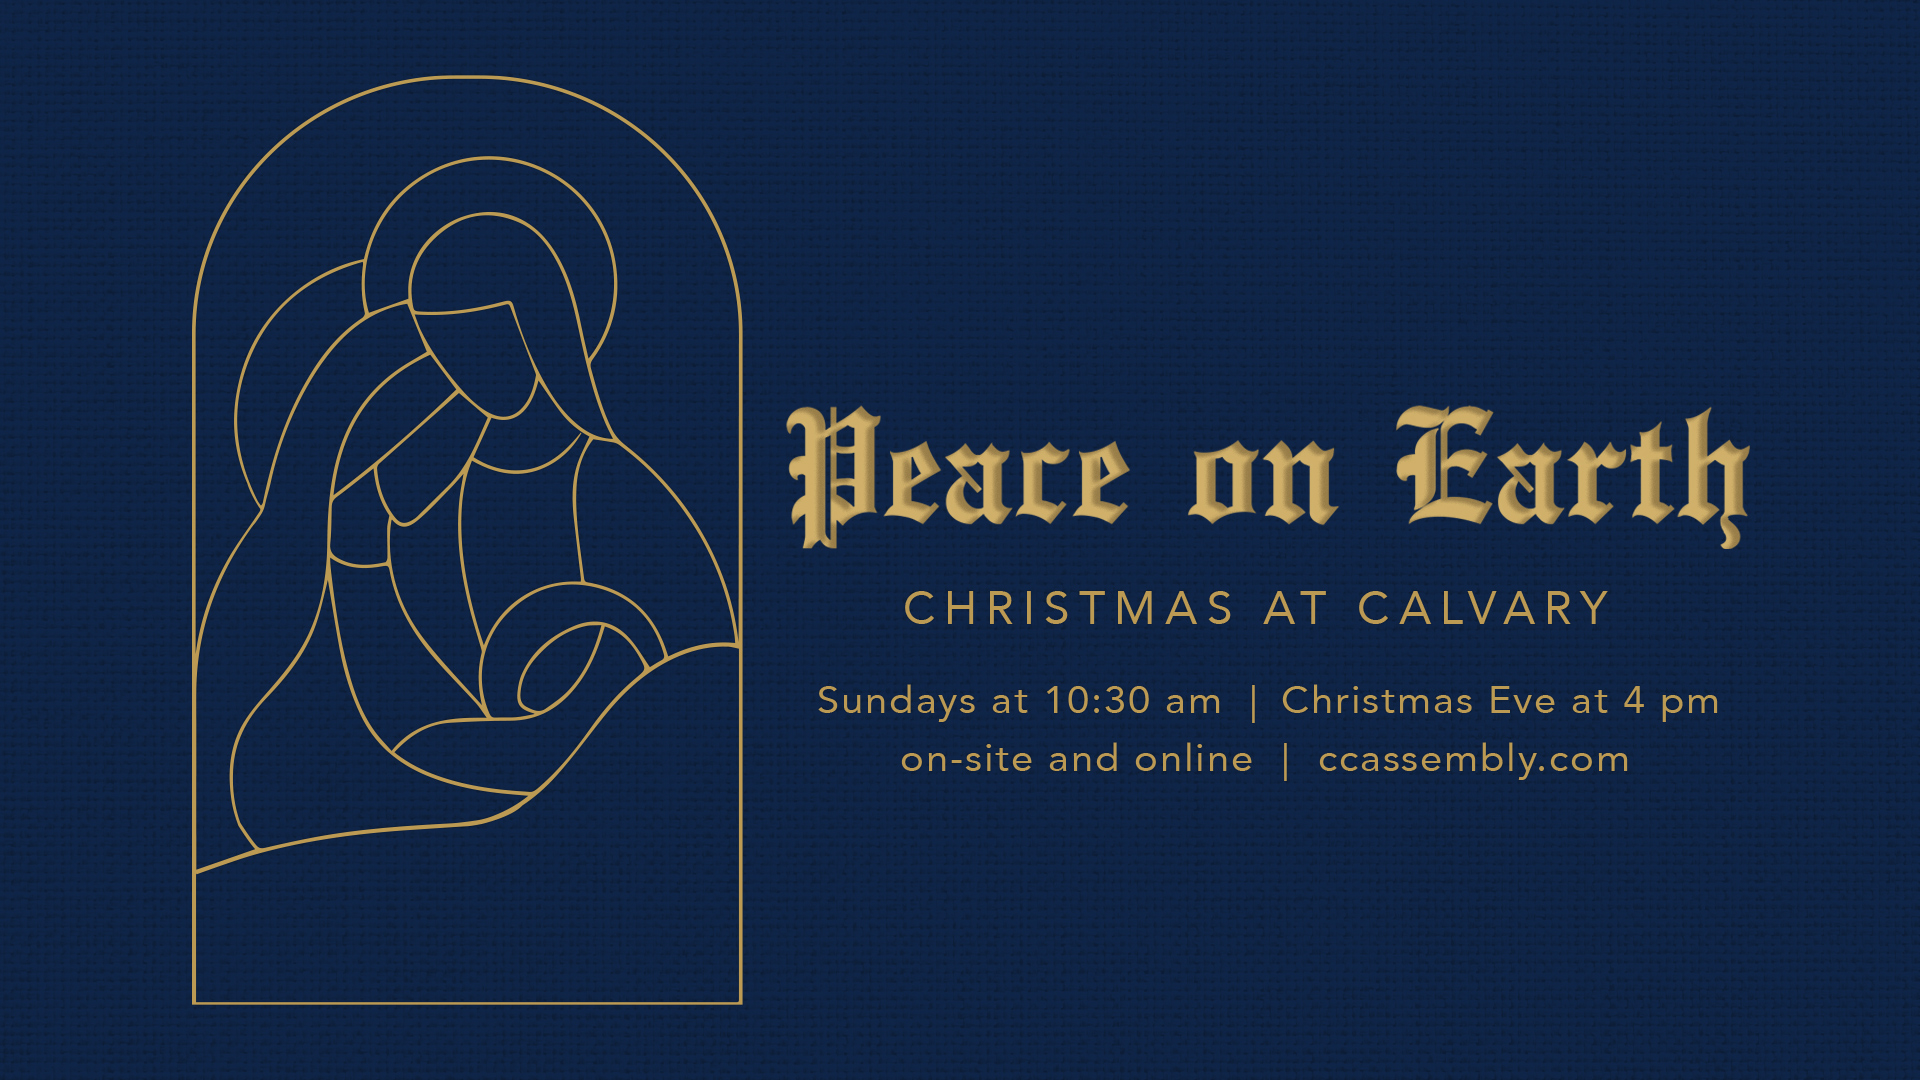 Christmas at Calvary: The Most Hope-Filled Invitation to Us from God